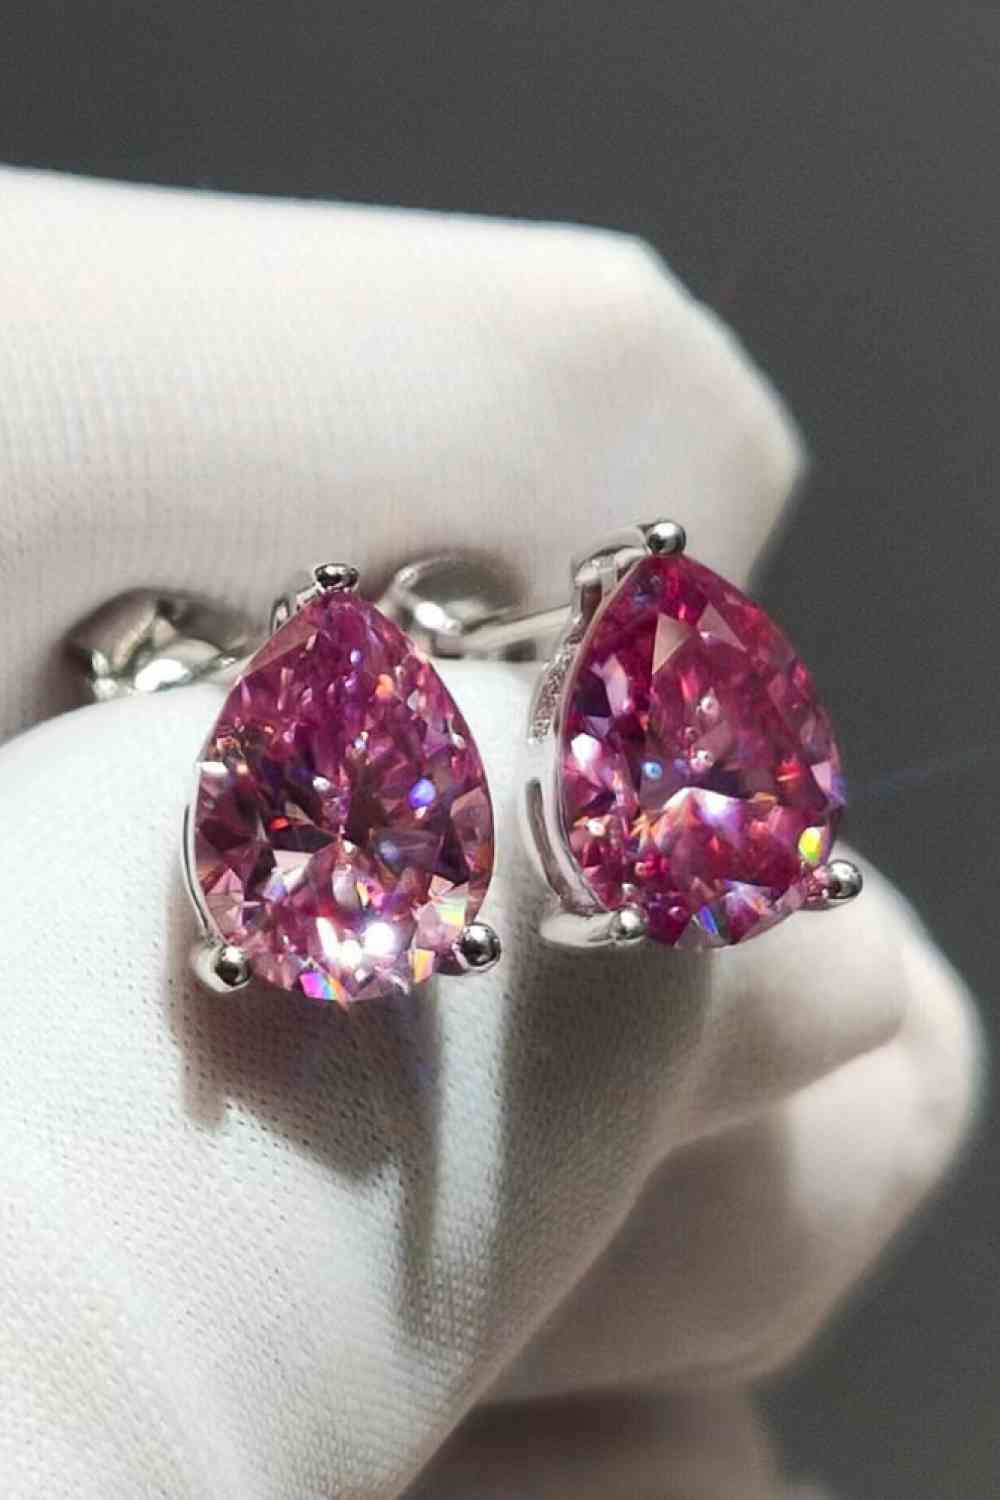 a pair of pink diamond earrings sitting on top of a white glove